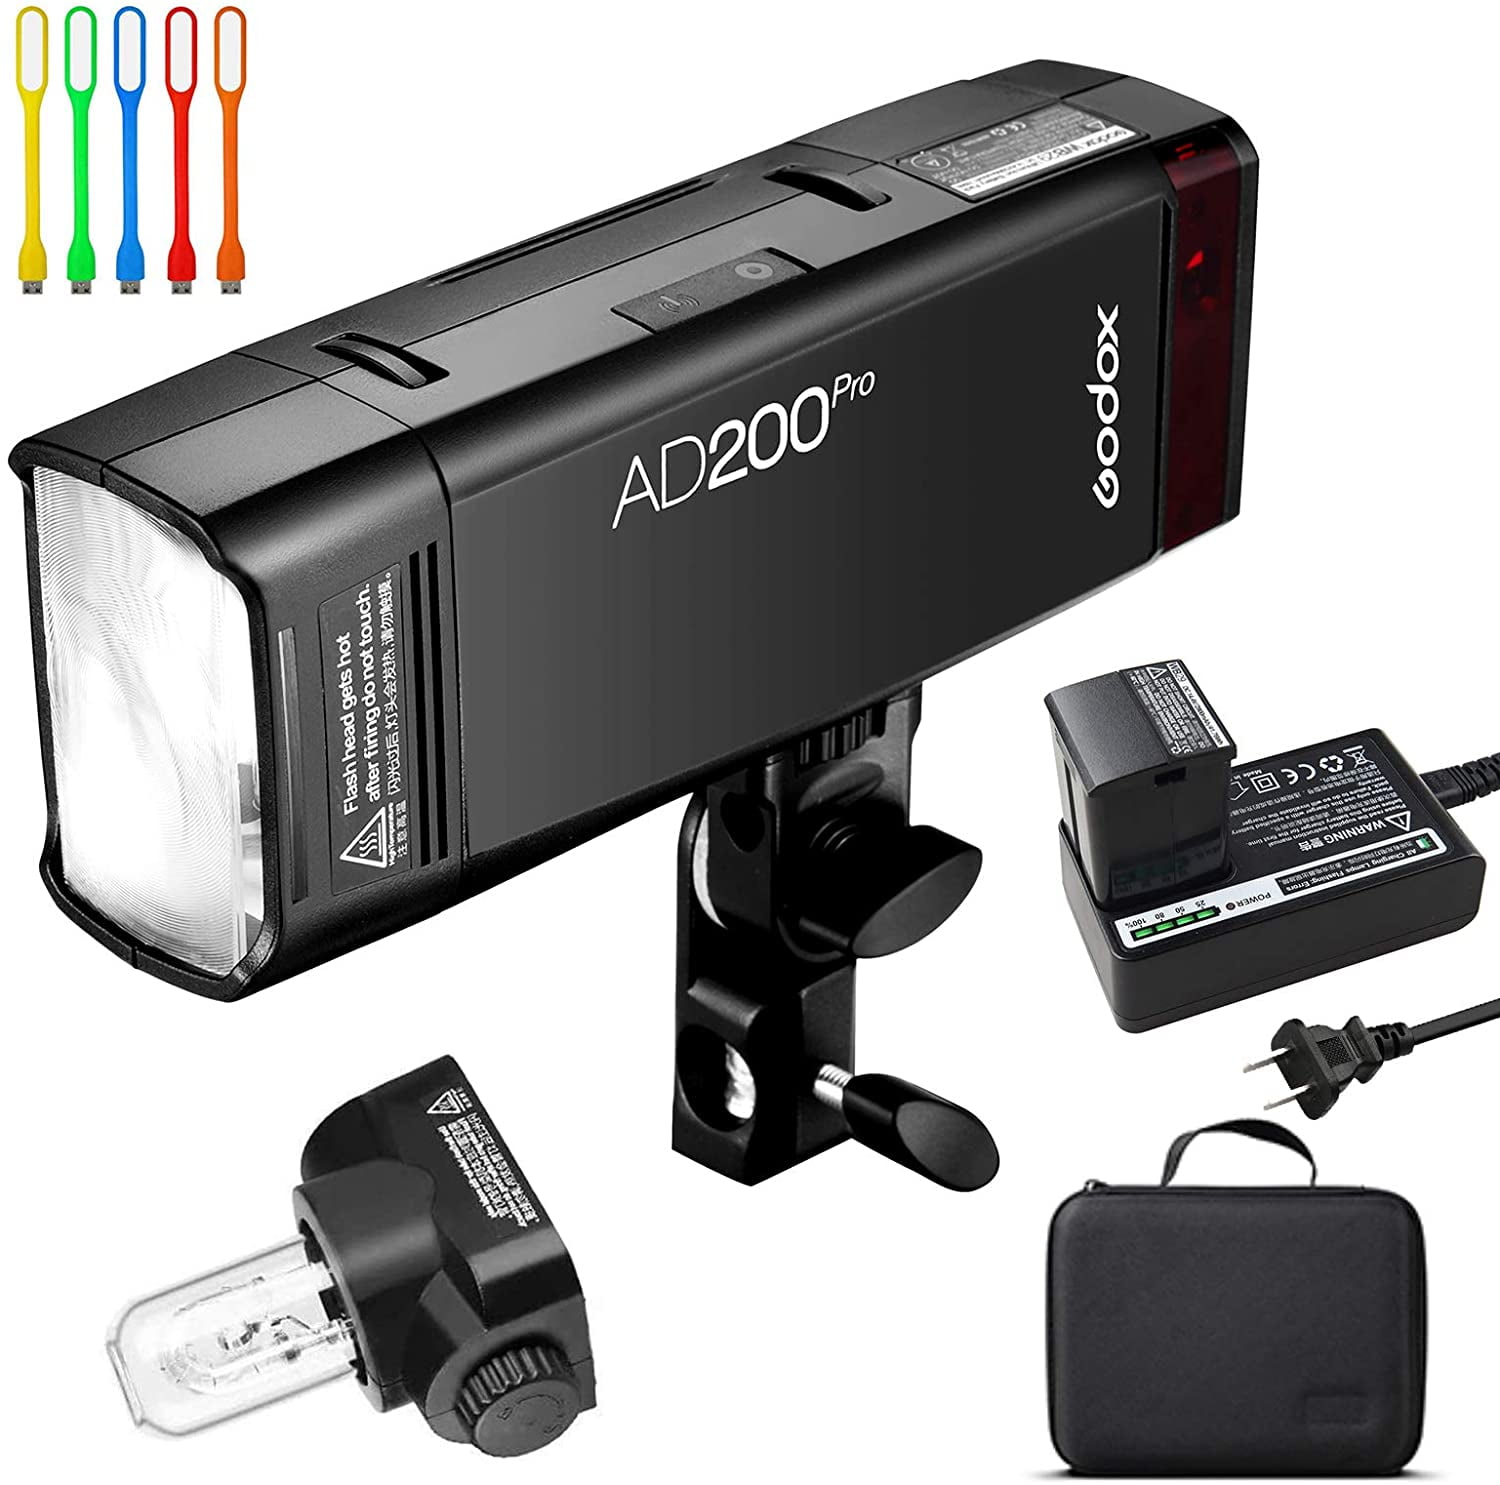 Godox AD200Pro 200Ws 2.4G TTL 1/8000 HSS Flash Strobe Speedlite Monolight with AD-M Reflector and Color Filters Kit to Cover 500 Full Power Shots AD200 Upgrade Version 